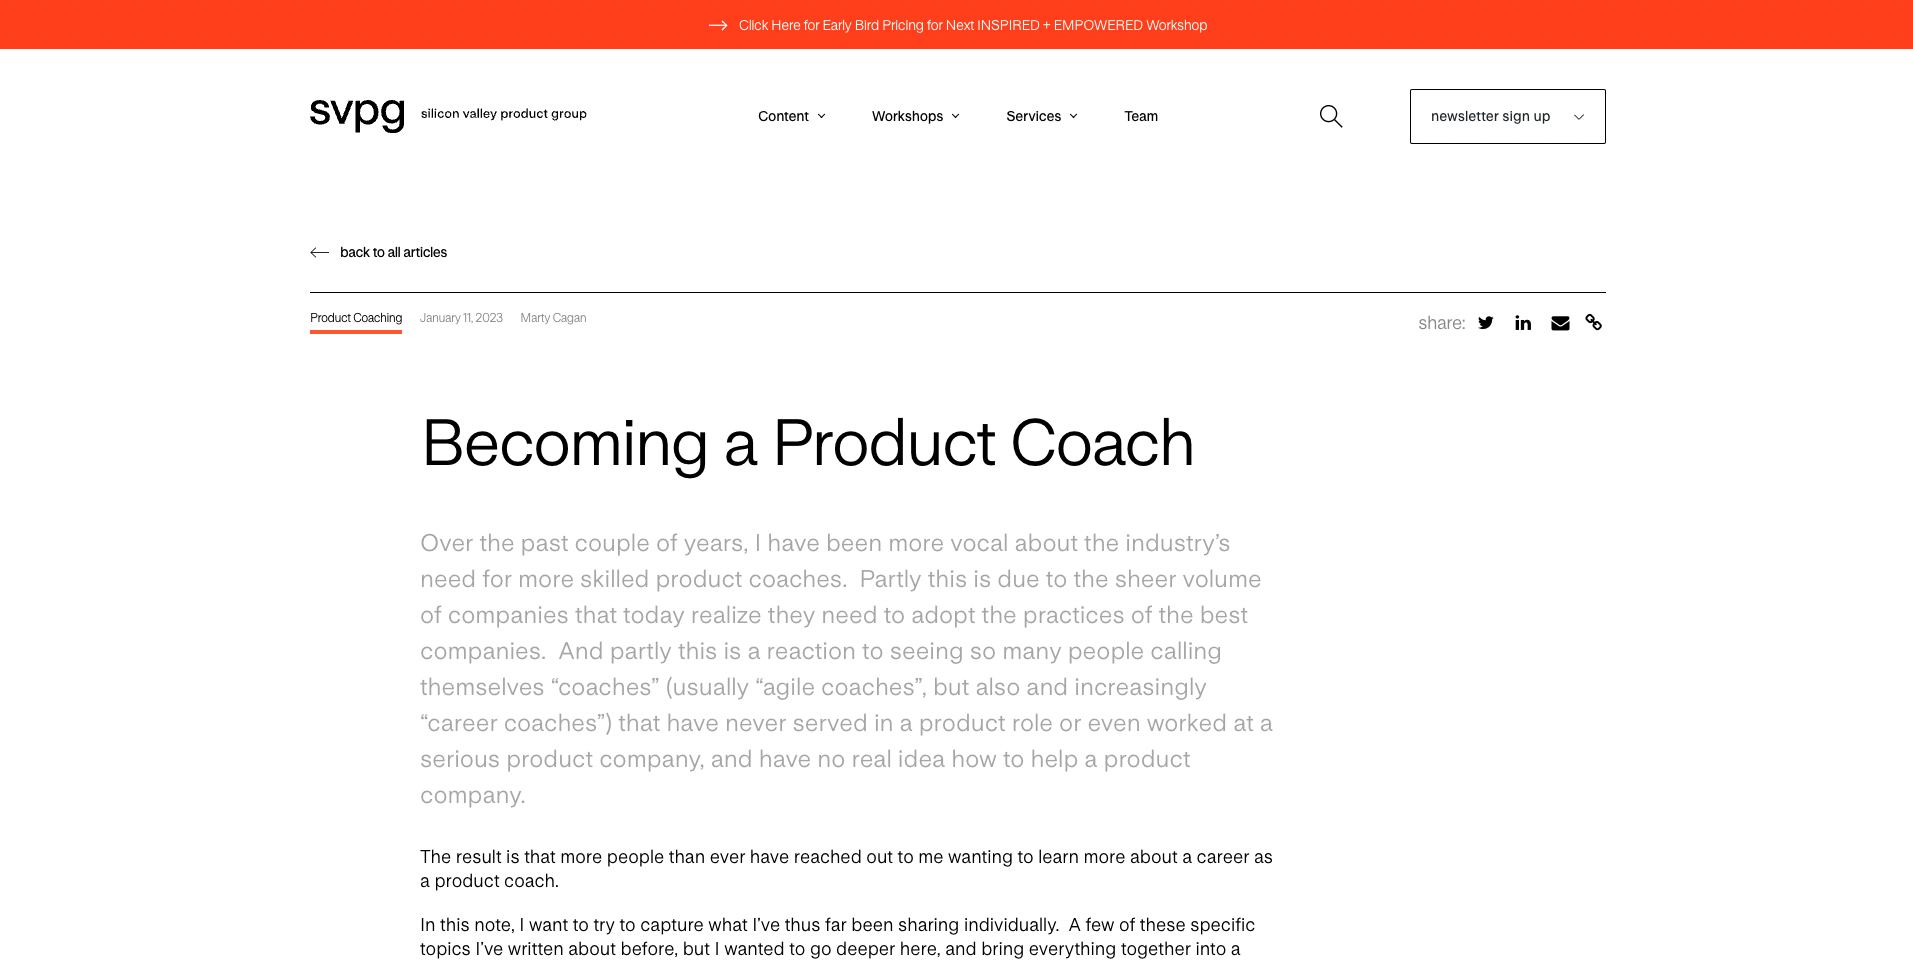 Becoming a Product Coach